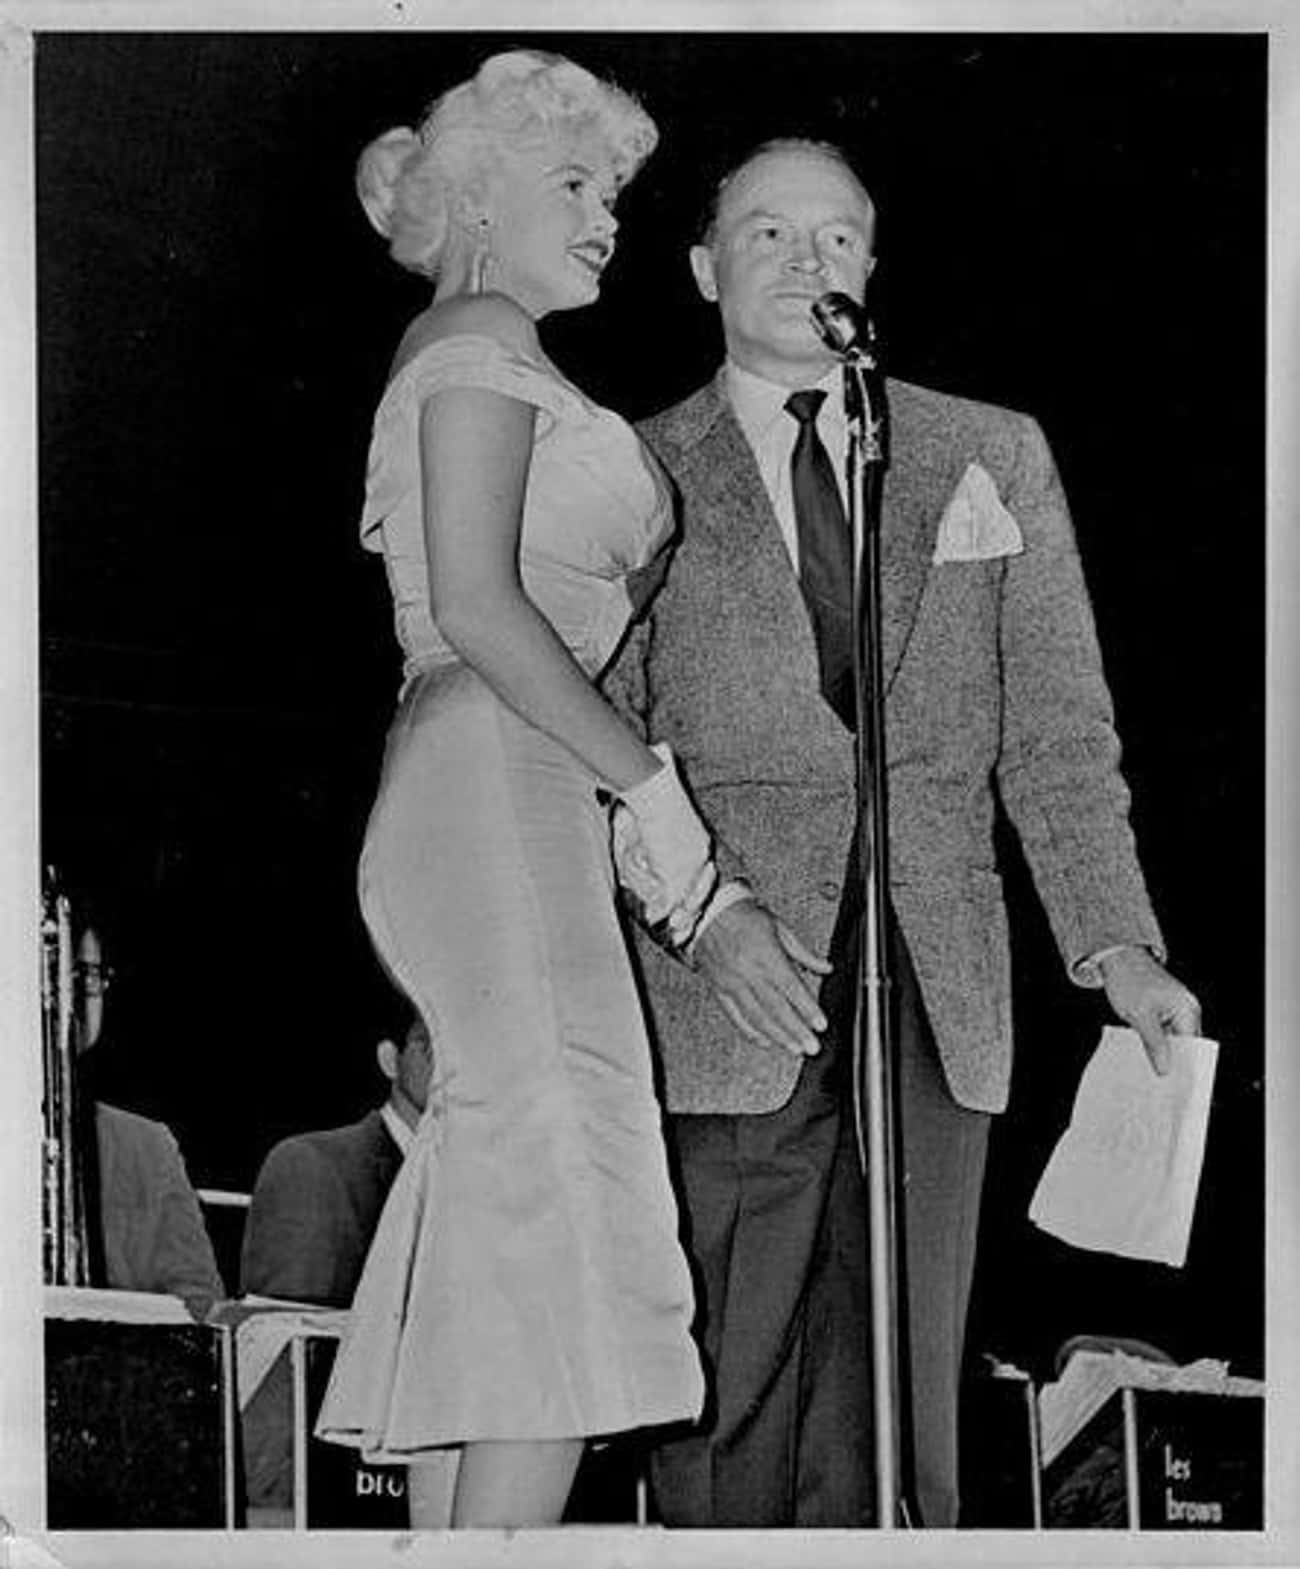 At The Height Of Her Popularity, Mansfield Toured With Bob Hope's USO Show To Entertain Troops